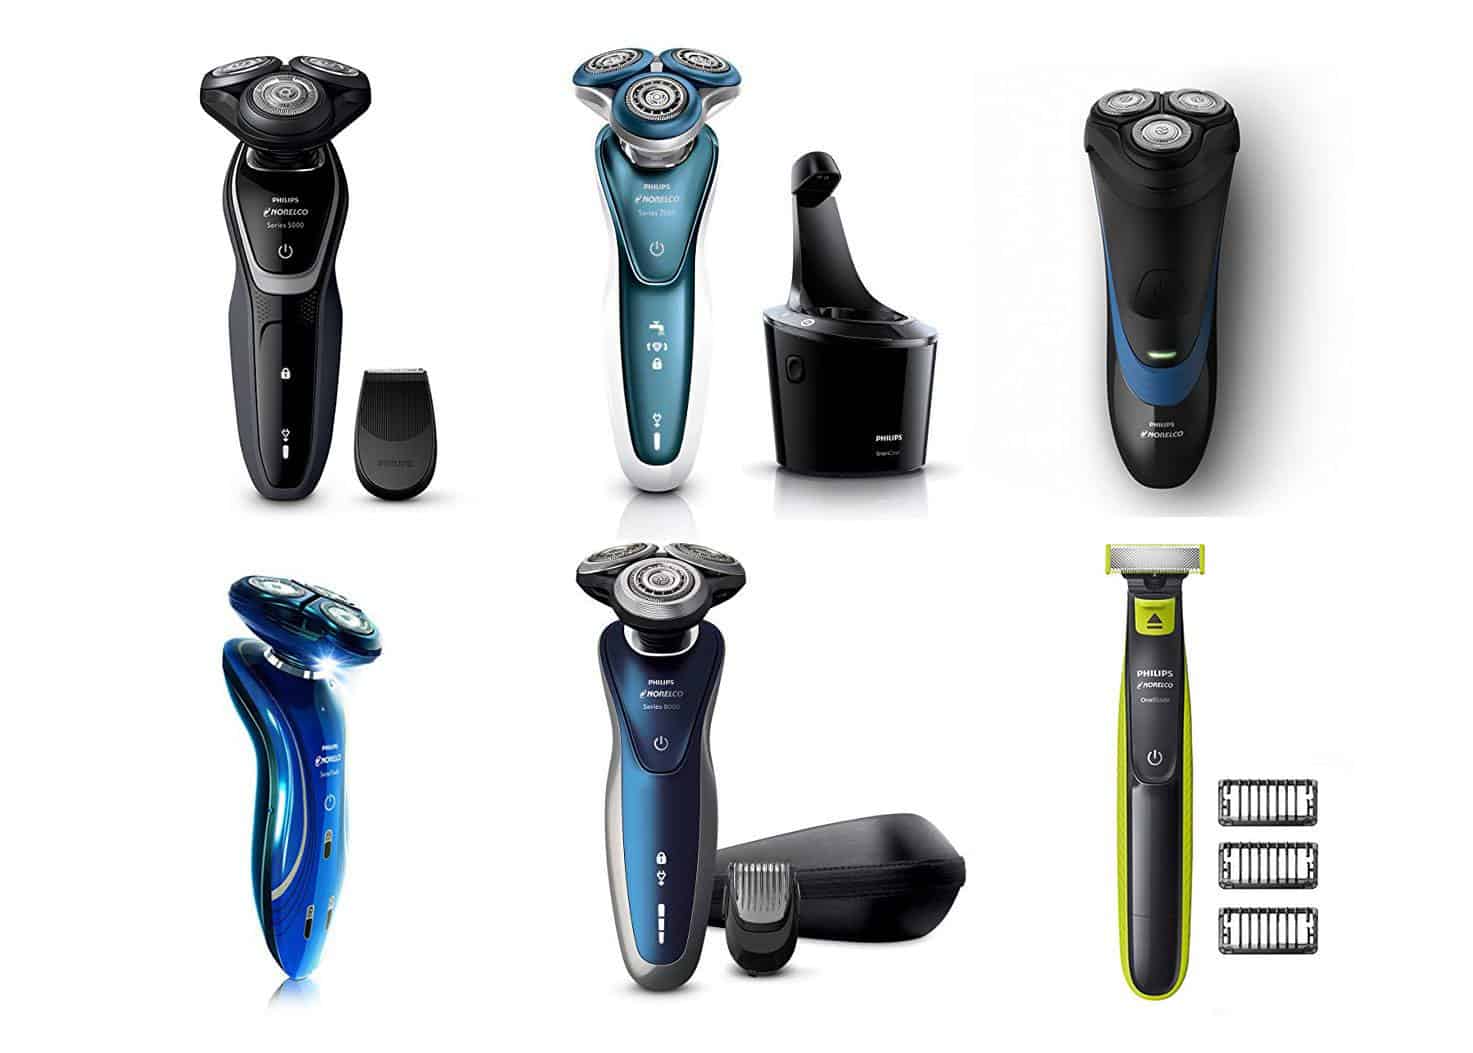 philips shaver and trimmer two in one